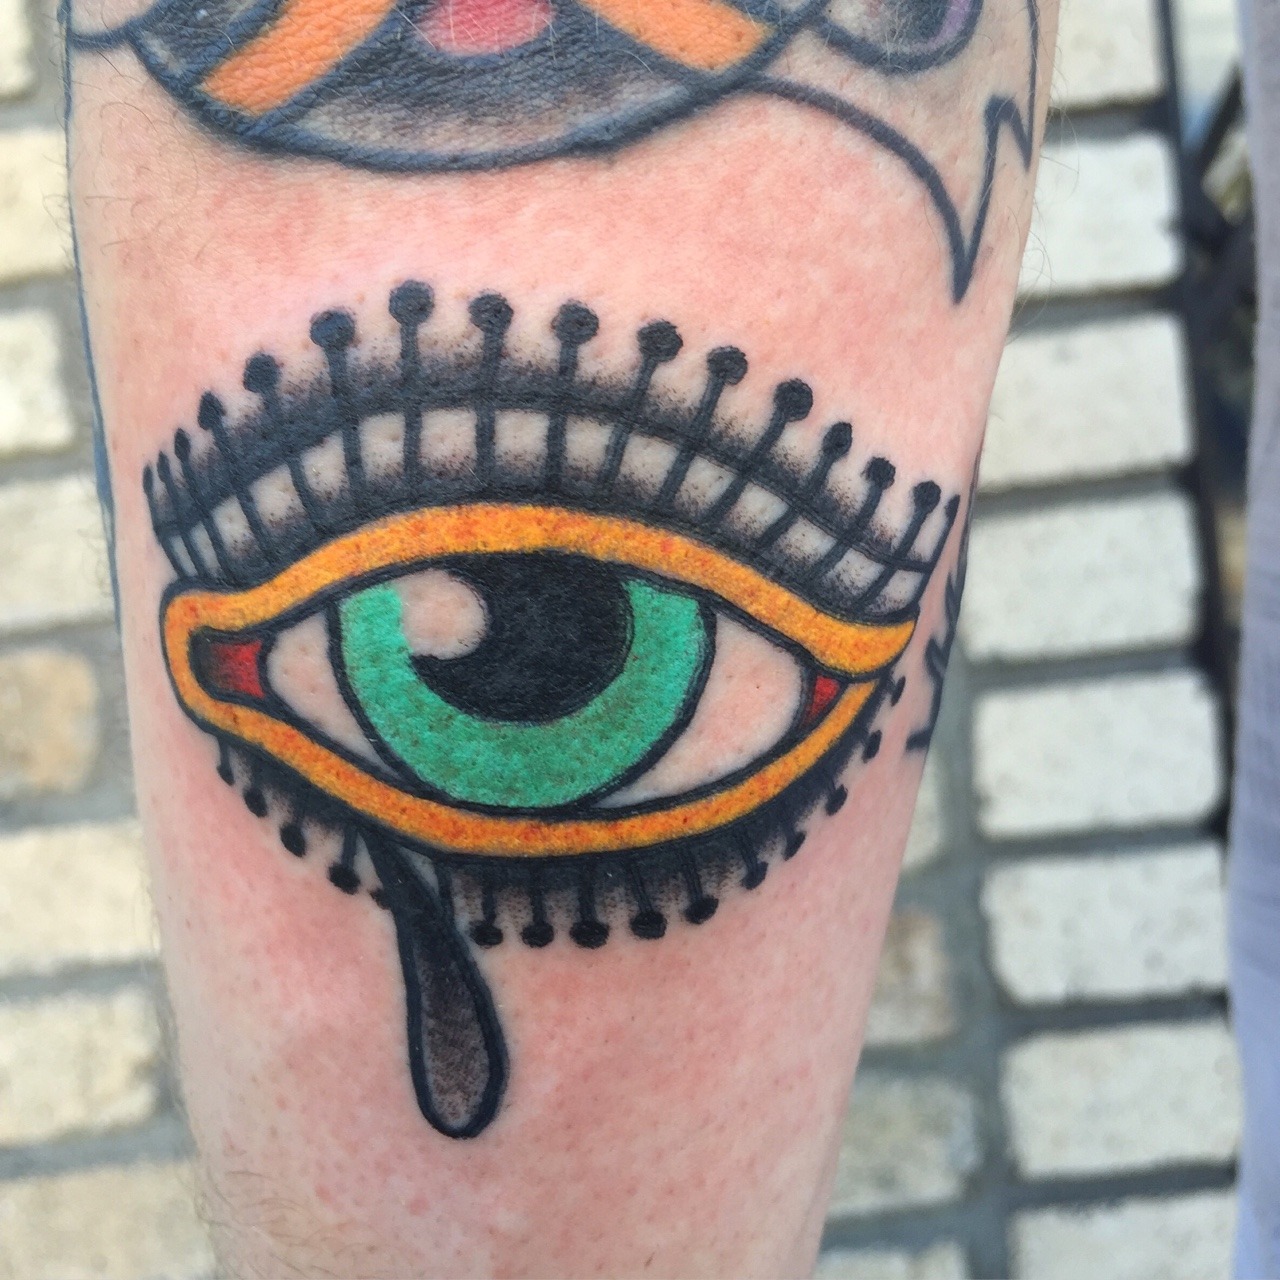 Get an Eyeful of These Tattoos  Tattoo Ideas Artists and Models